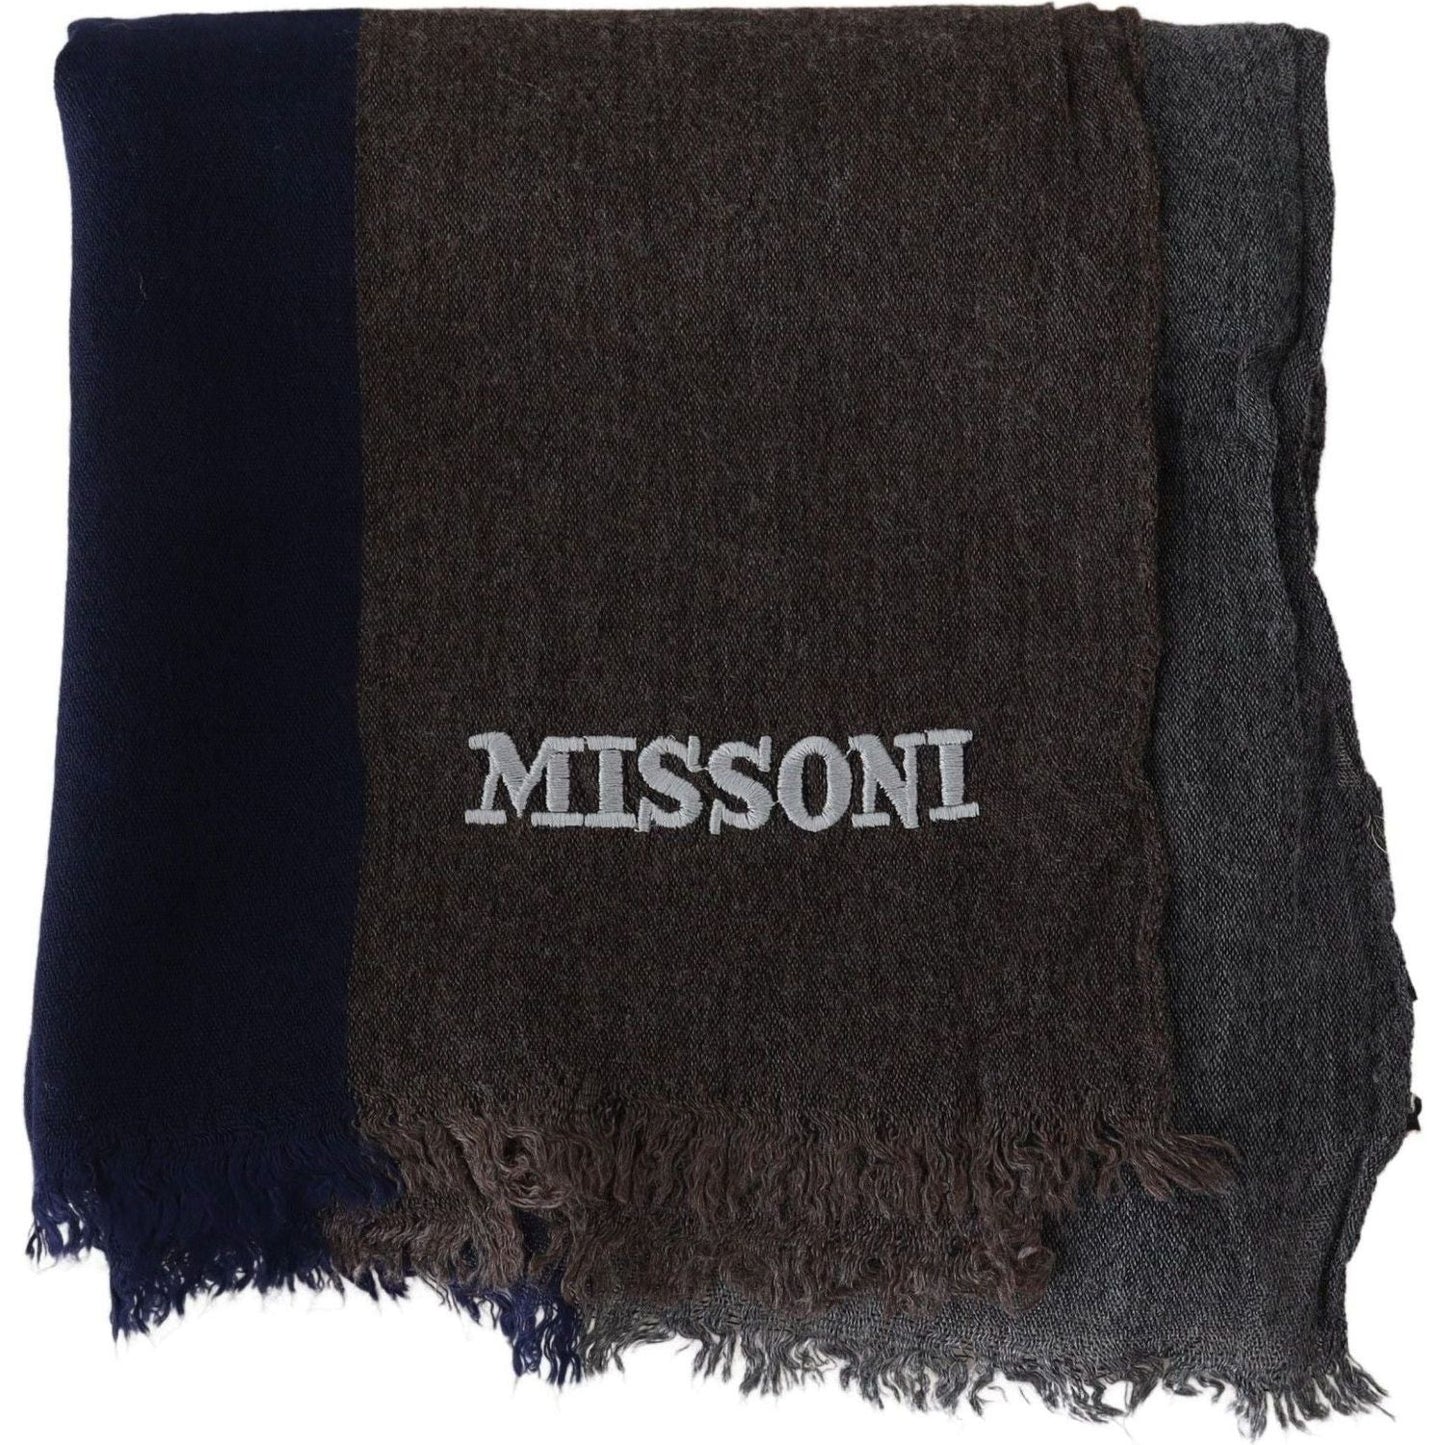 Missoni Elegant Multicolor Wool Scarf with Signature Embroidery multicolor-striped-wool-unisex-wrap-fringes-scarf